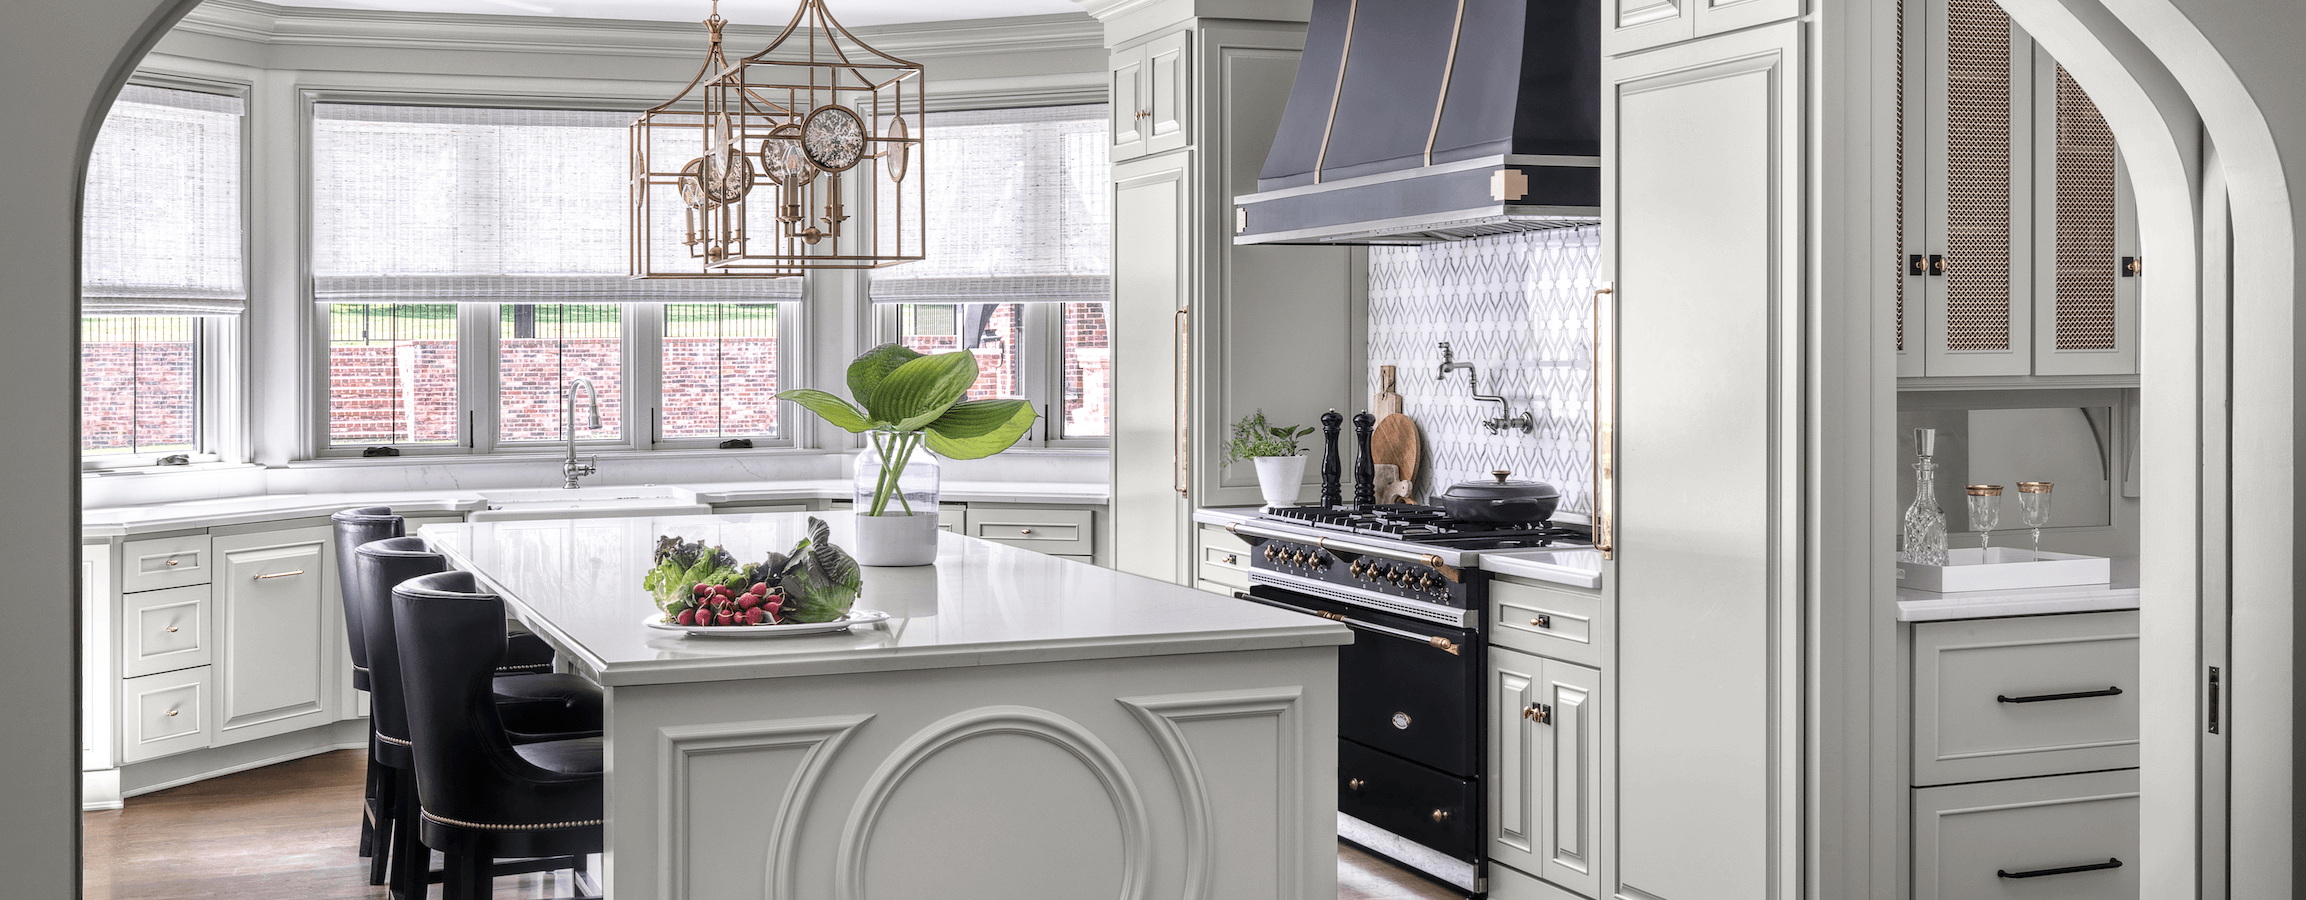 Historic-home-kitchen-renovation-by-Mitchell-Wall-1